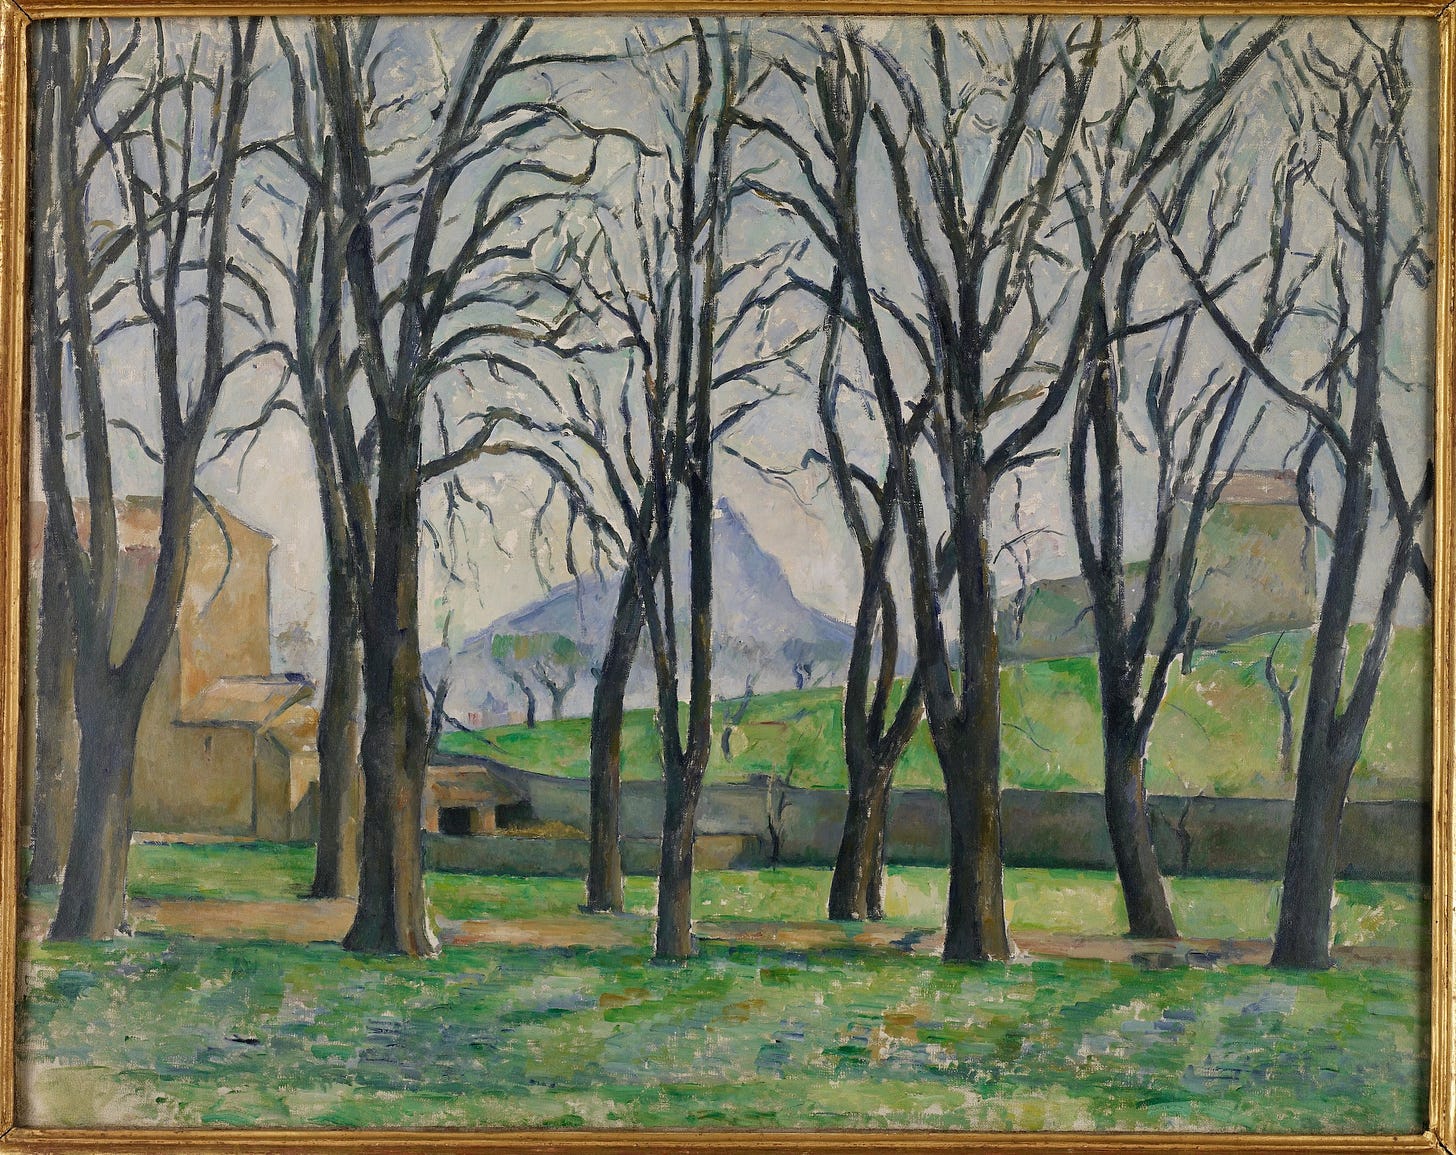 Oil painting depicting a serene landscape, with a series of barren trees in the foreground